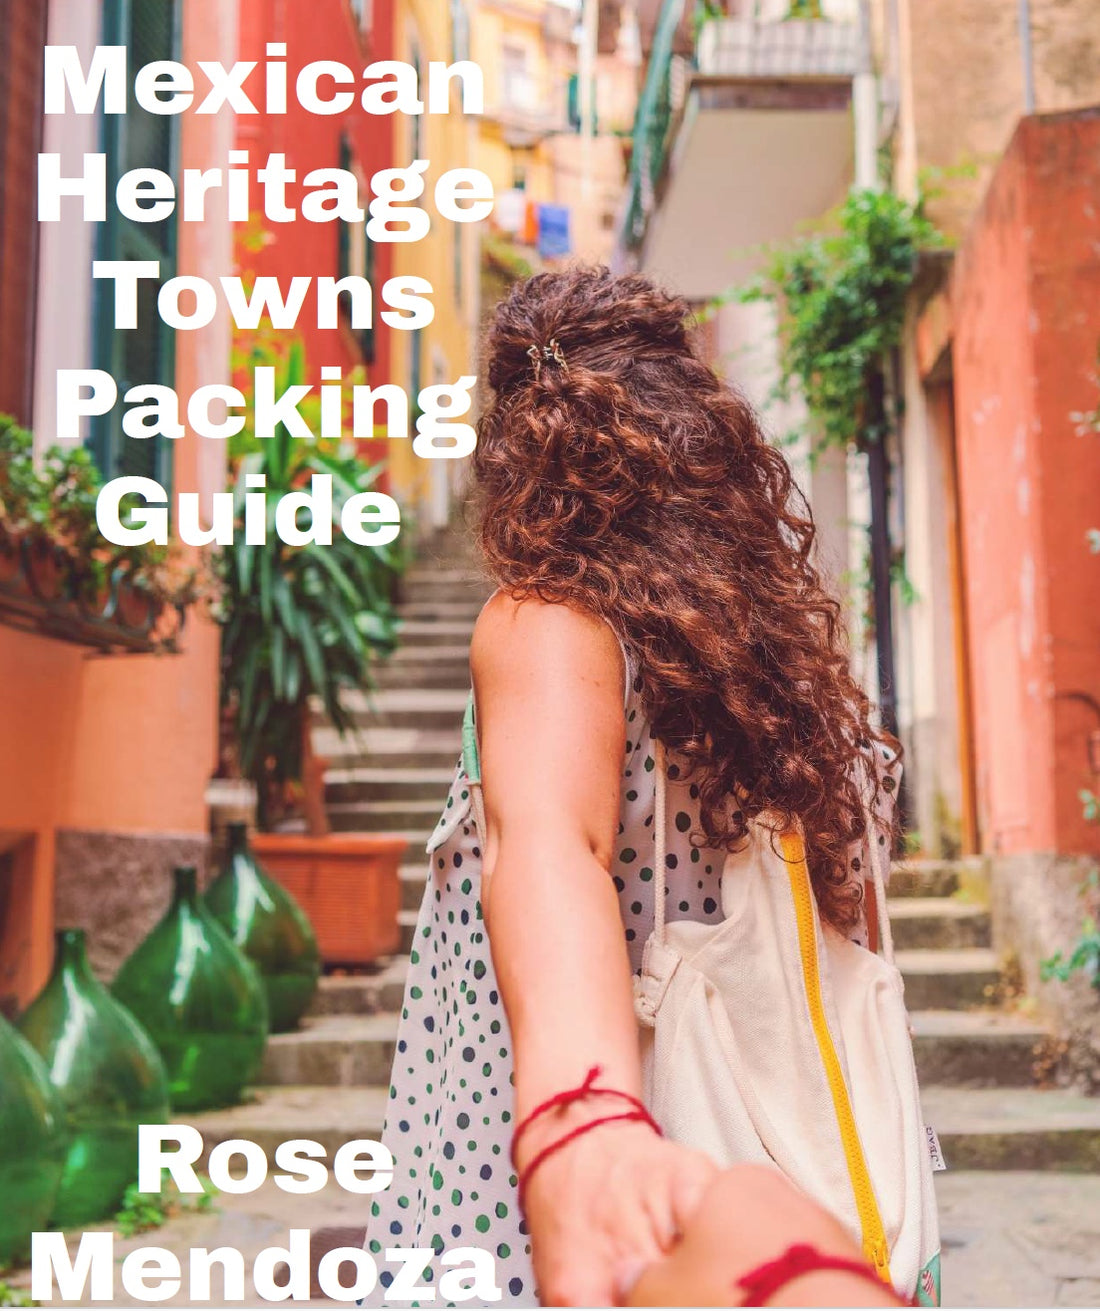 6 Essential Packing Tips for a Safe and Enjoyable Visit to a Mexican Heritage Town